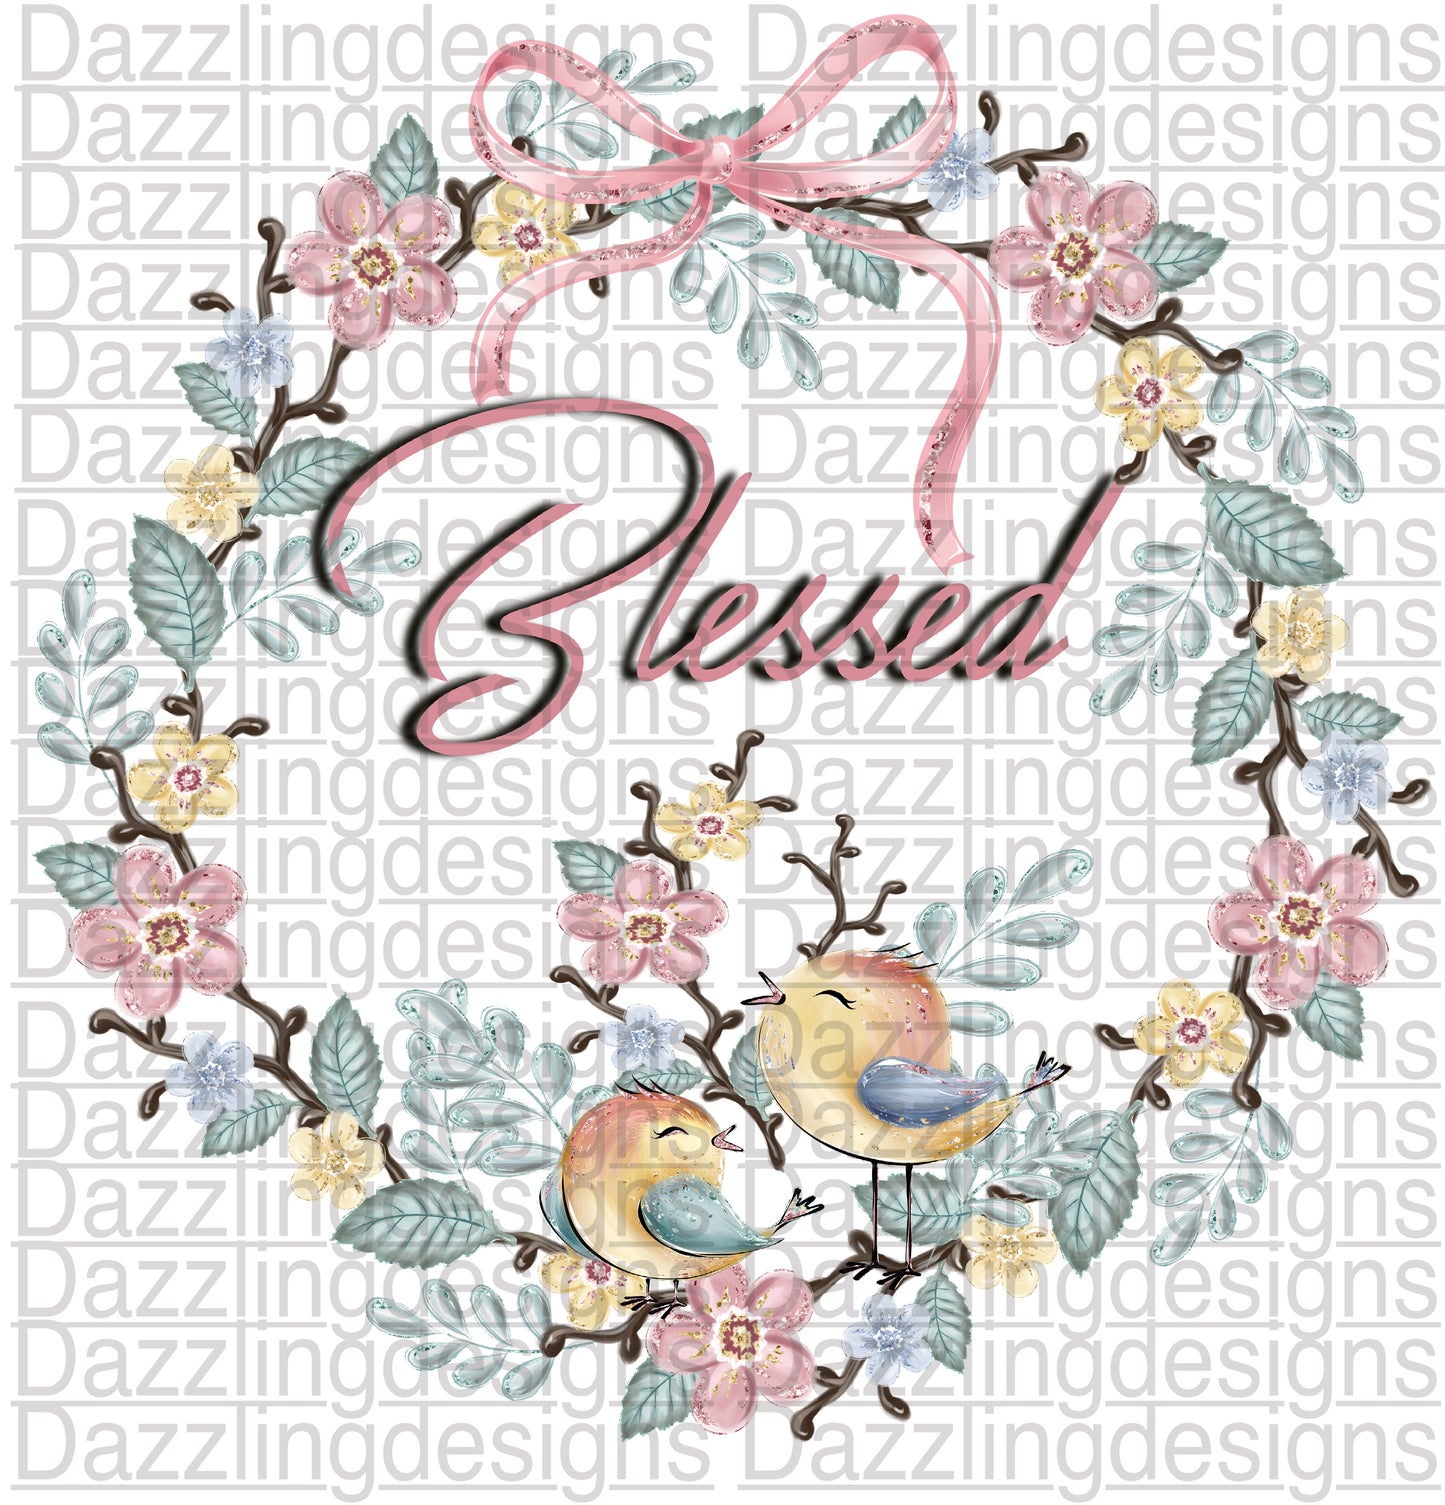 Blessed Wreath